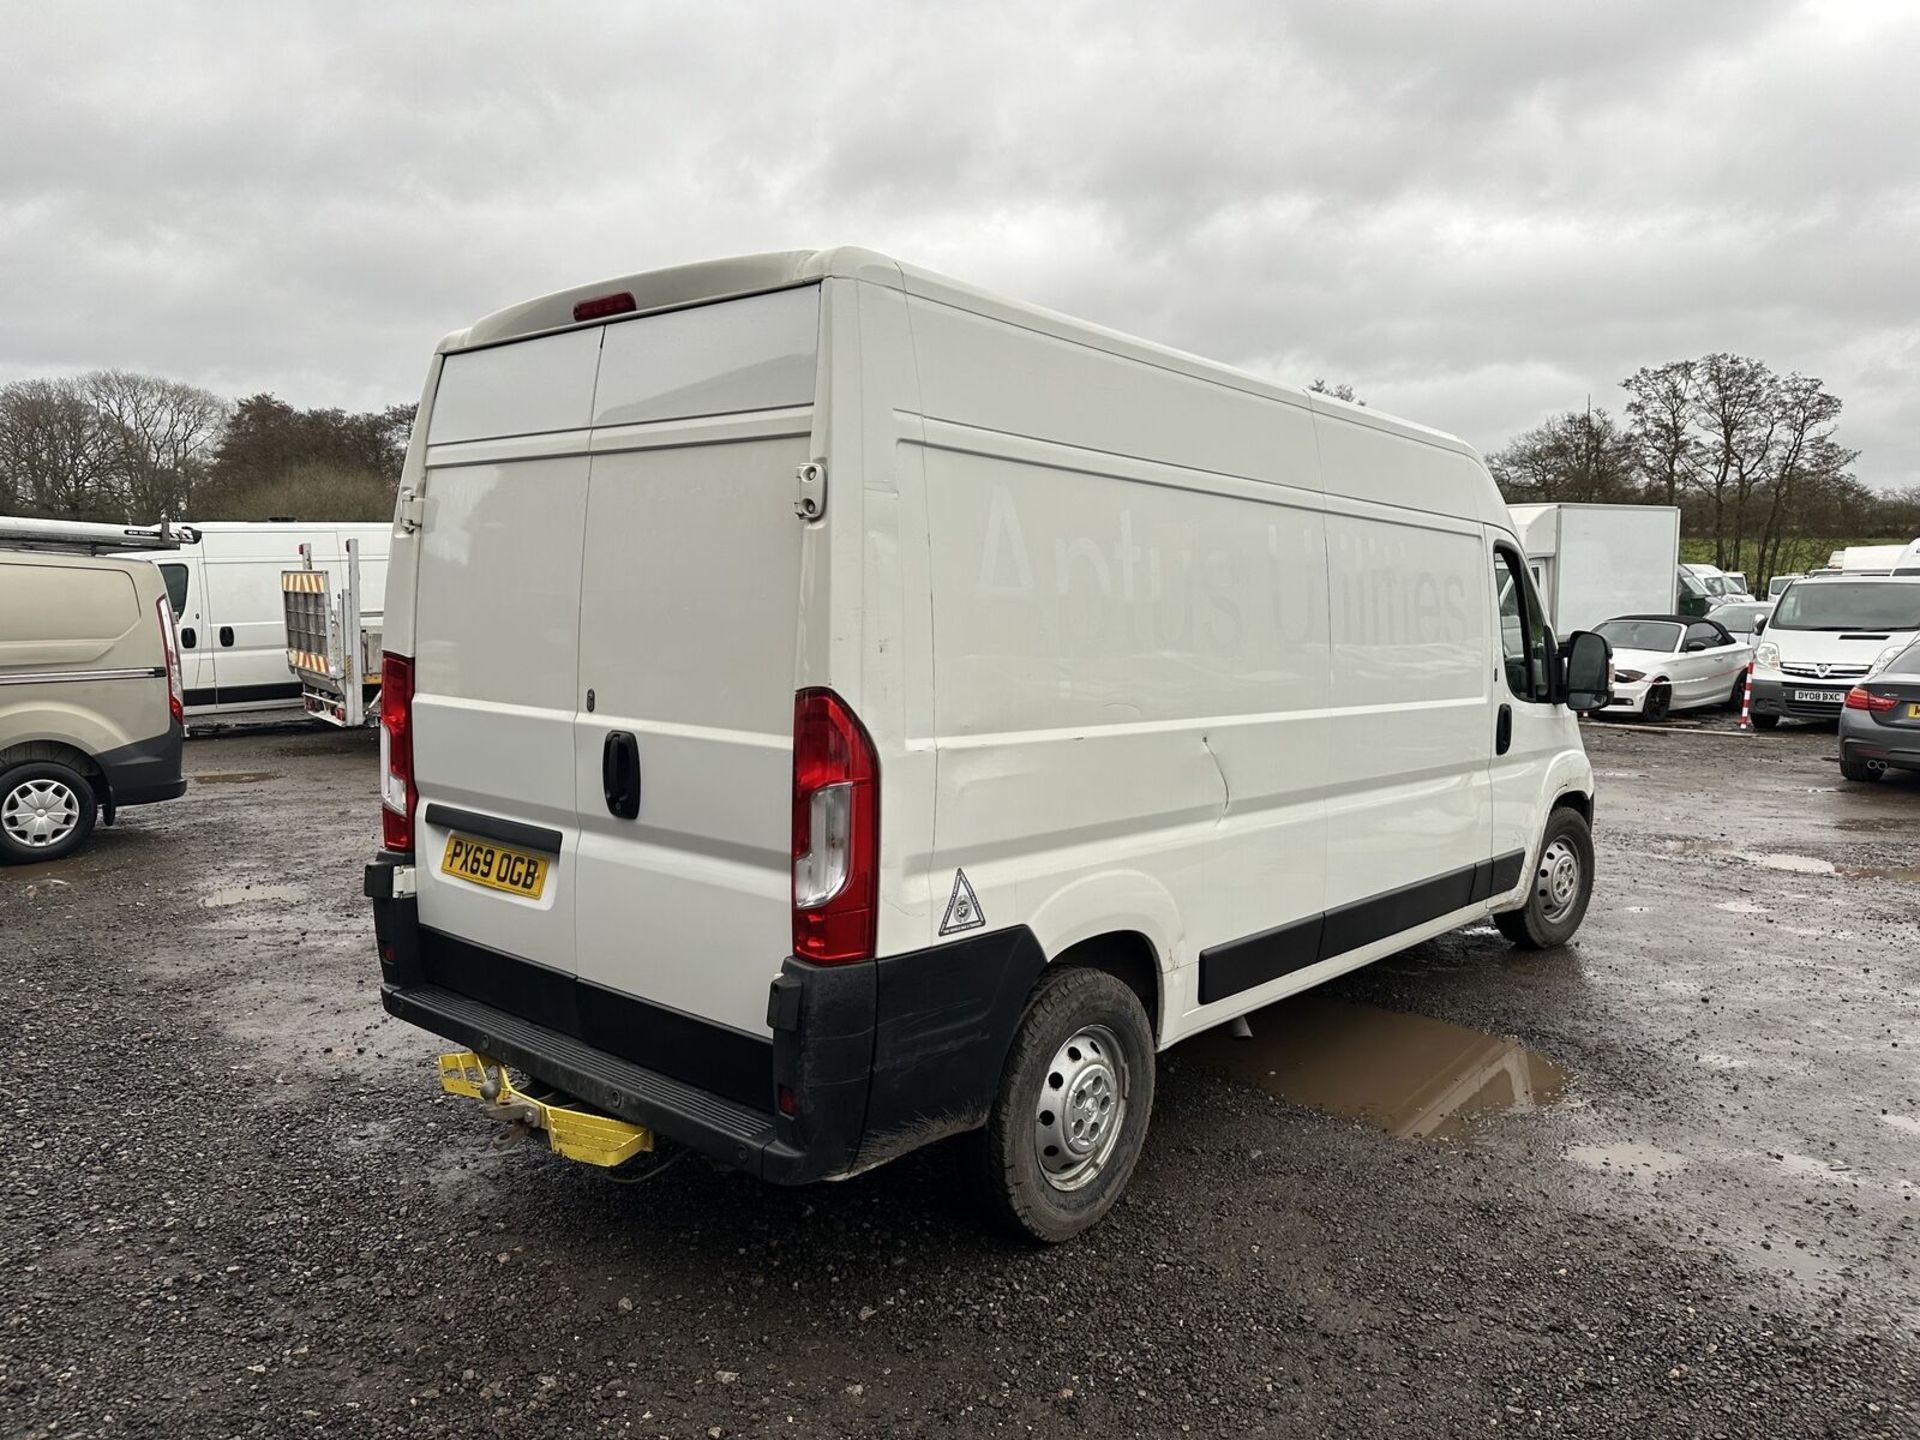 69 PLATE PEUGEOT BOXER: BLUE HDI POWER, READY FOR DUTY - Image 11 of 19